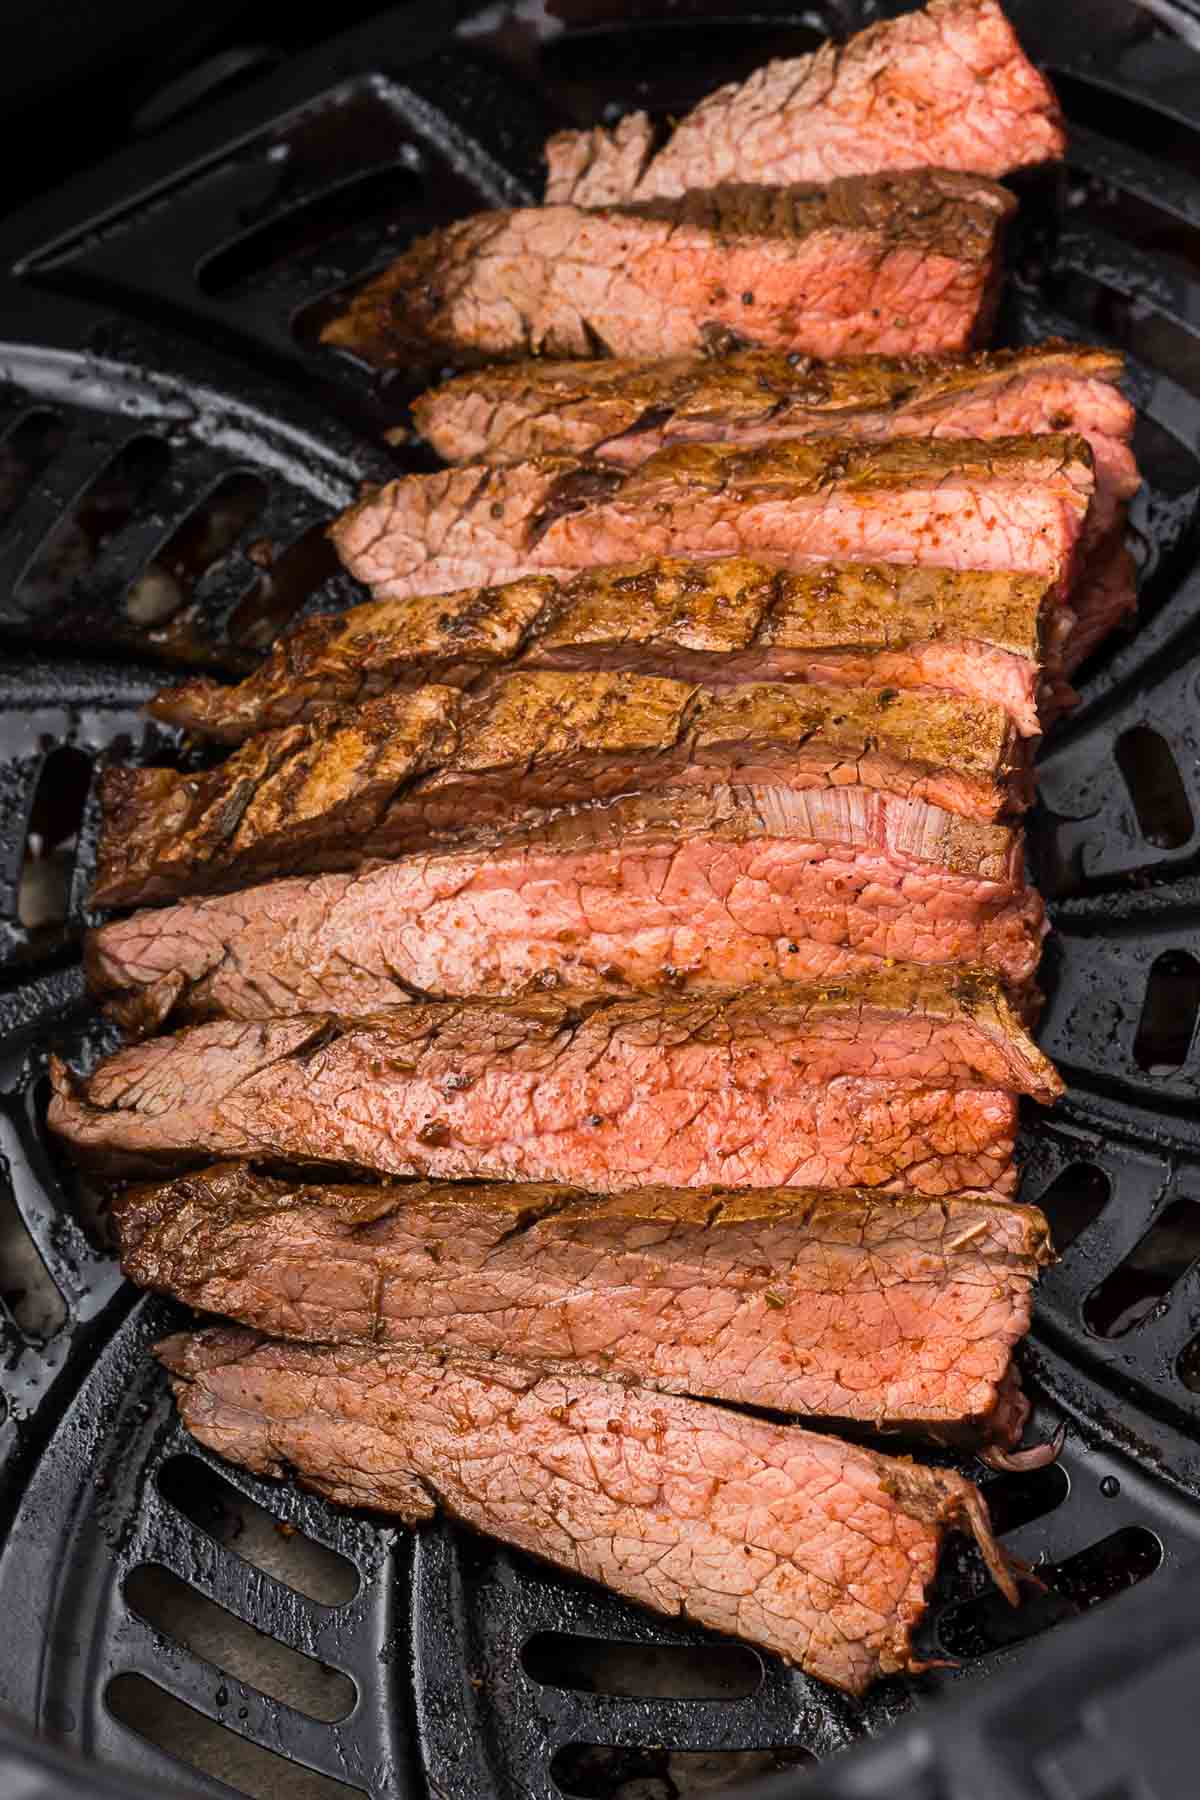 Flank steak in an air fryer basket after it has cooked.